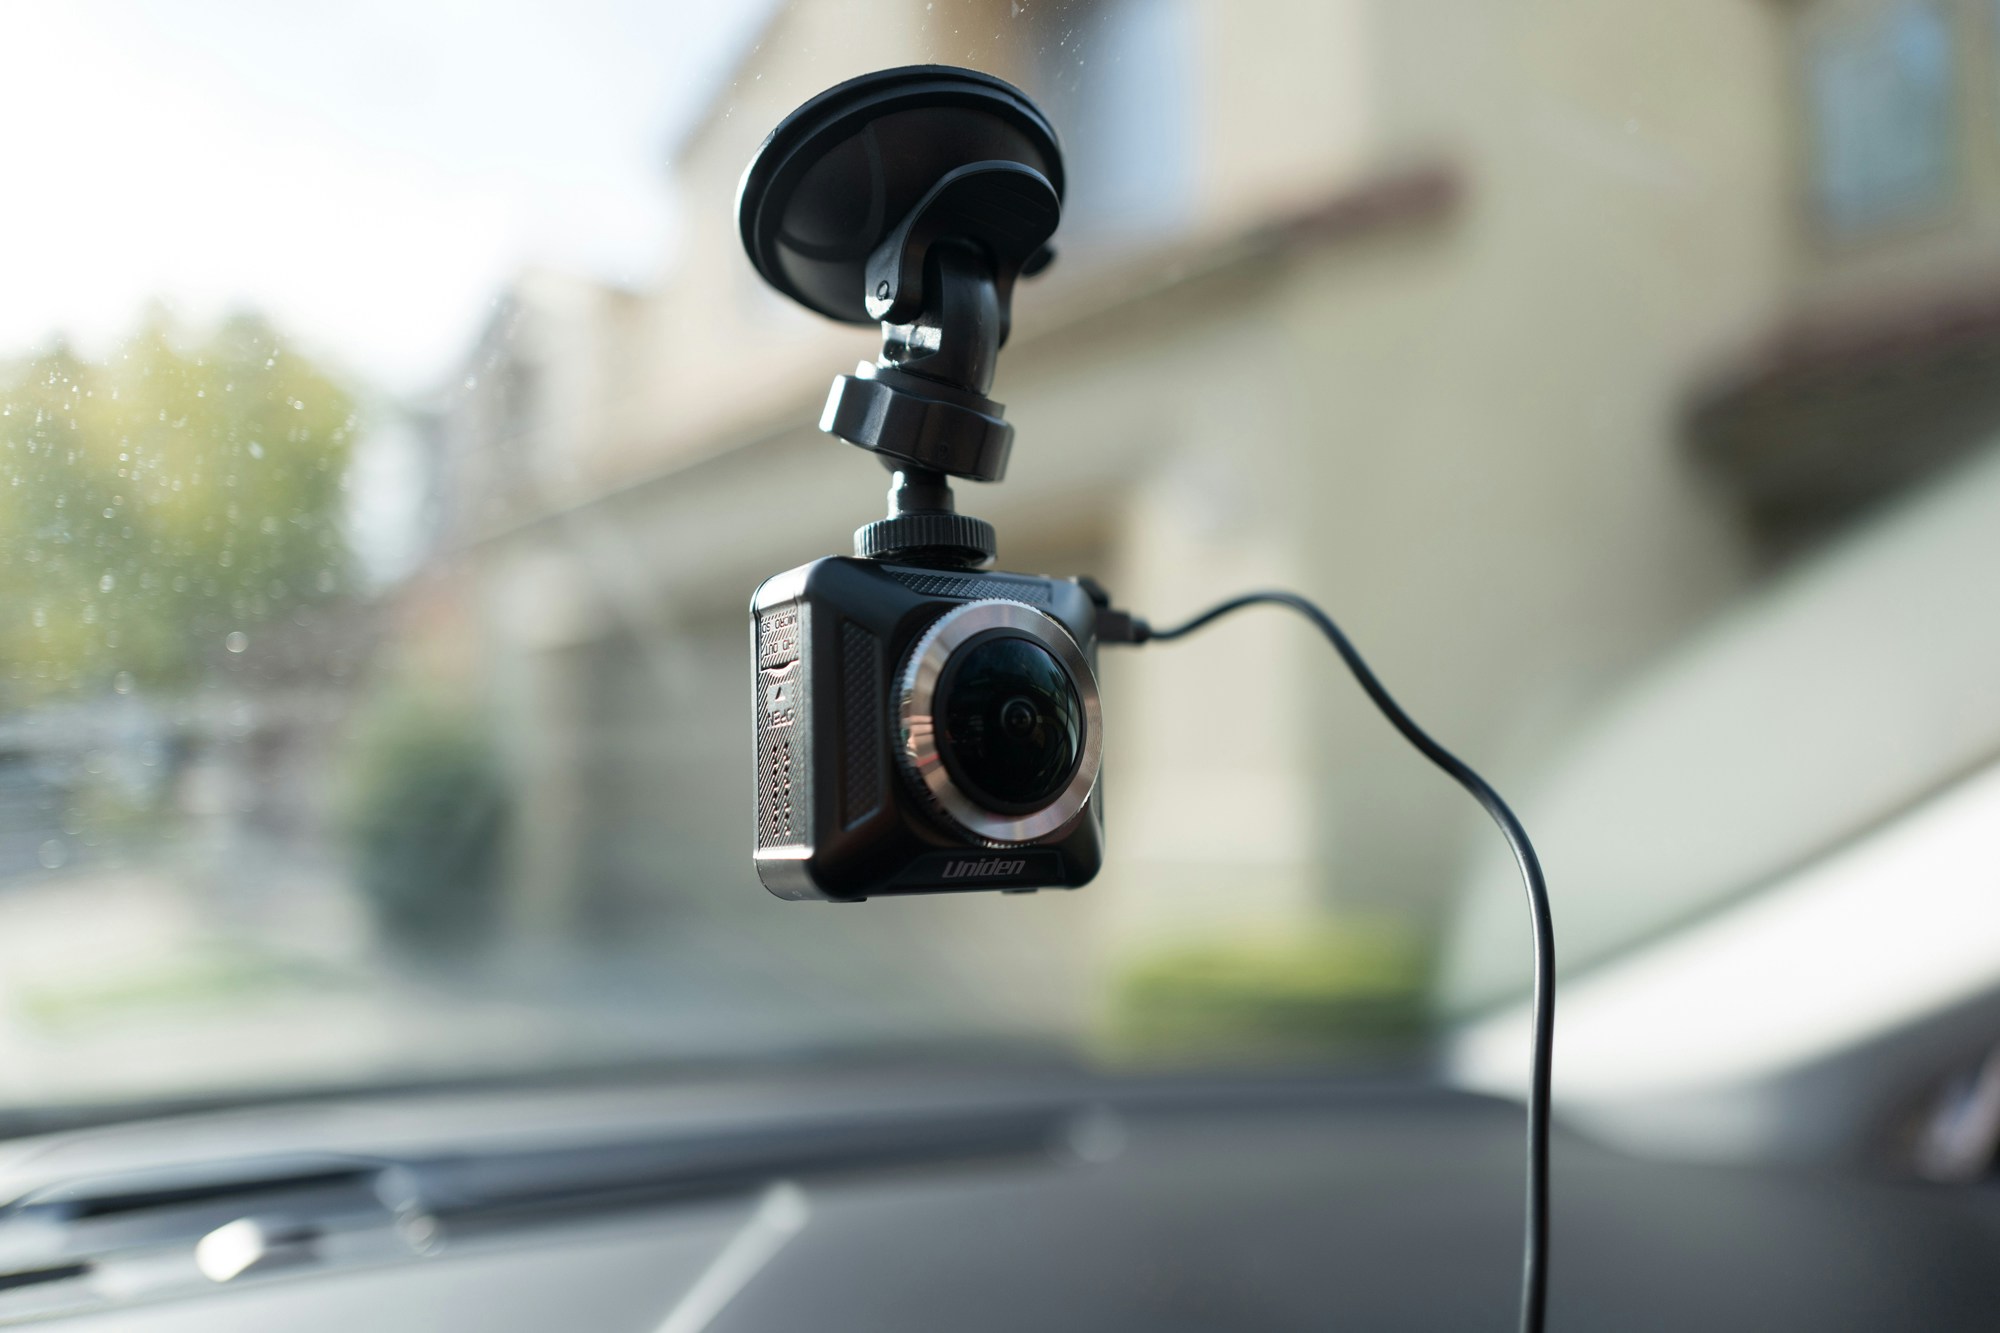 Close-up of Uniden dashboard camera (dashcam) installed on the interior window of an Uber vehicle in San Ramon, California; dashcams are often used by crowdsourced taxi drivers to increase driver and passenger safety, September 27, 2018. (Photo by Smith Collection/Gado/Getty Images)